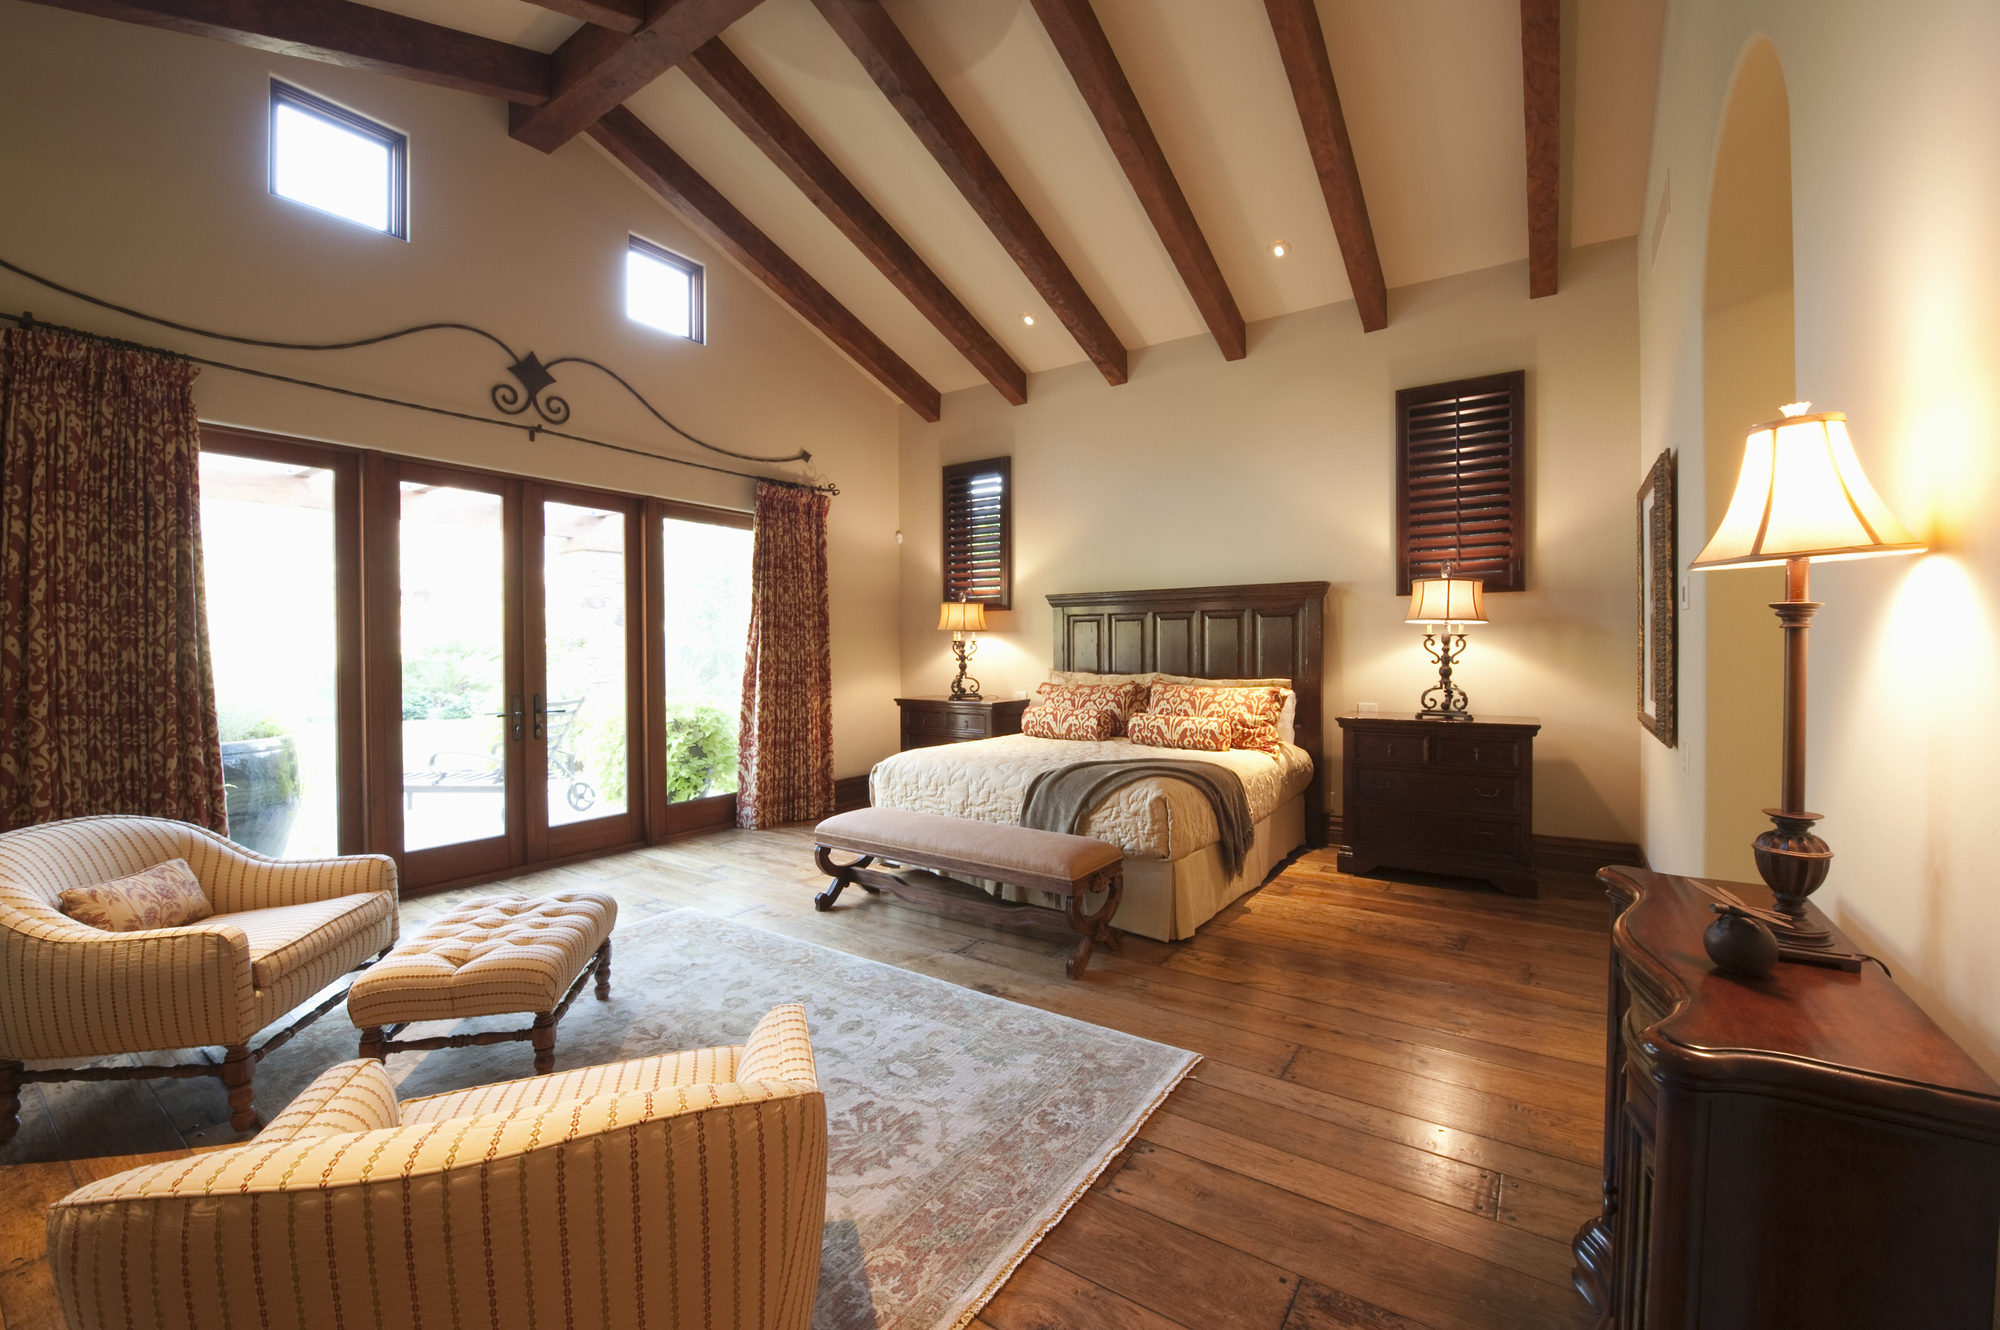 Spacious Bedroom With Beamed Wooden Ceiling